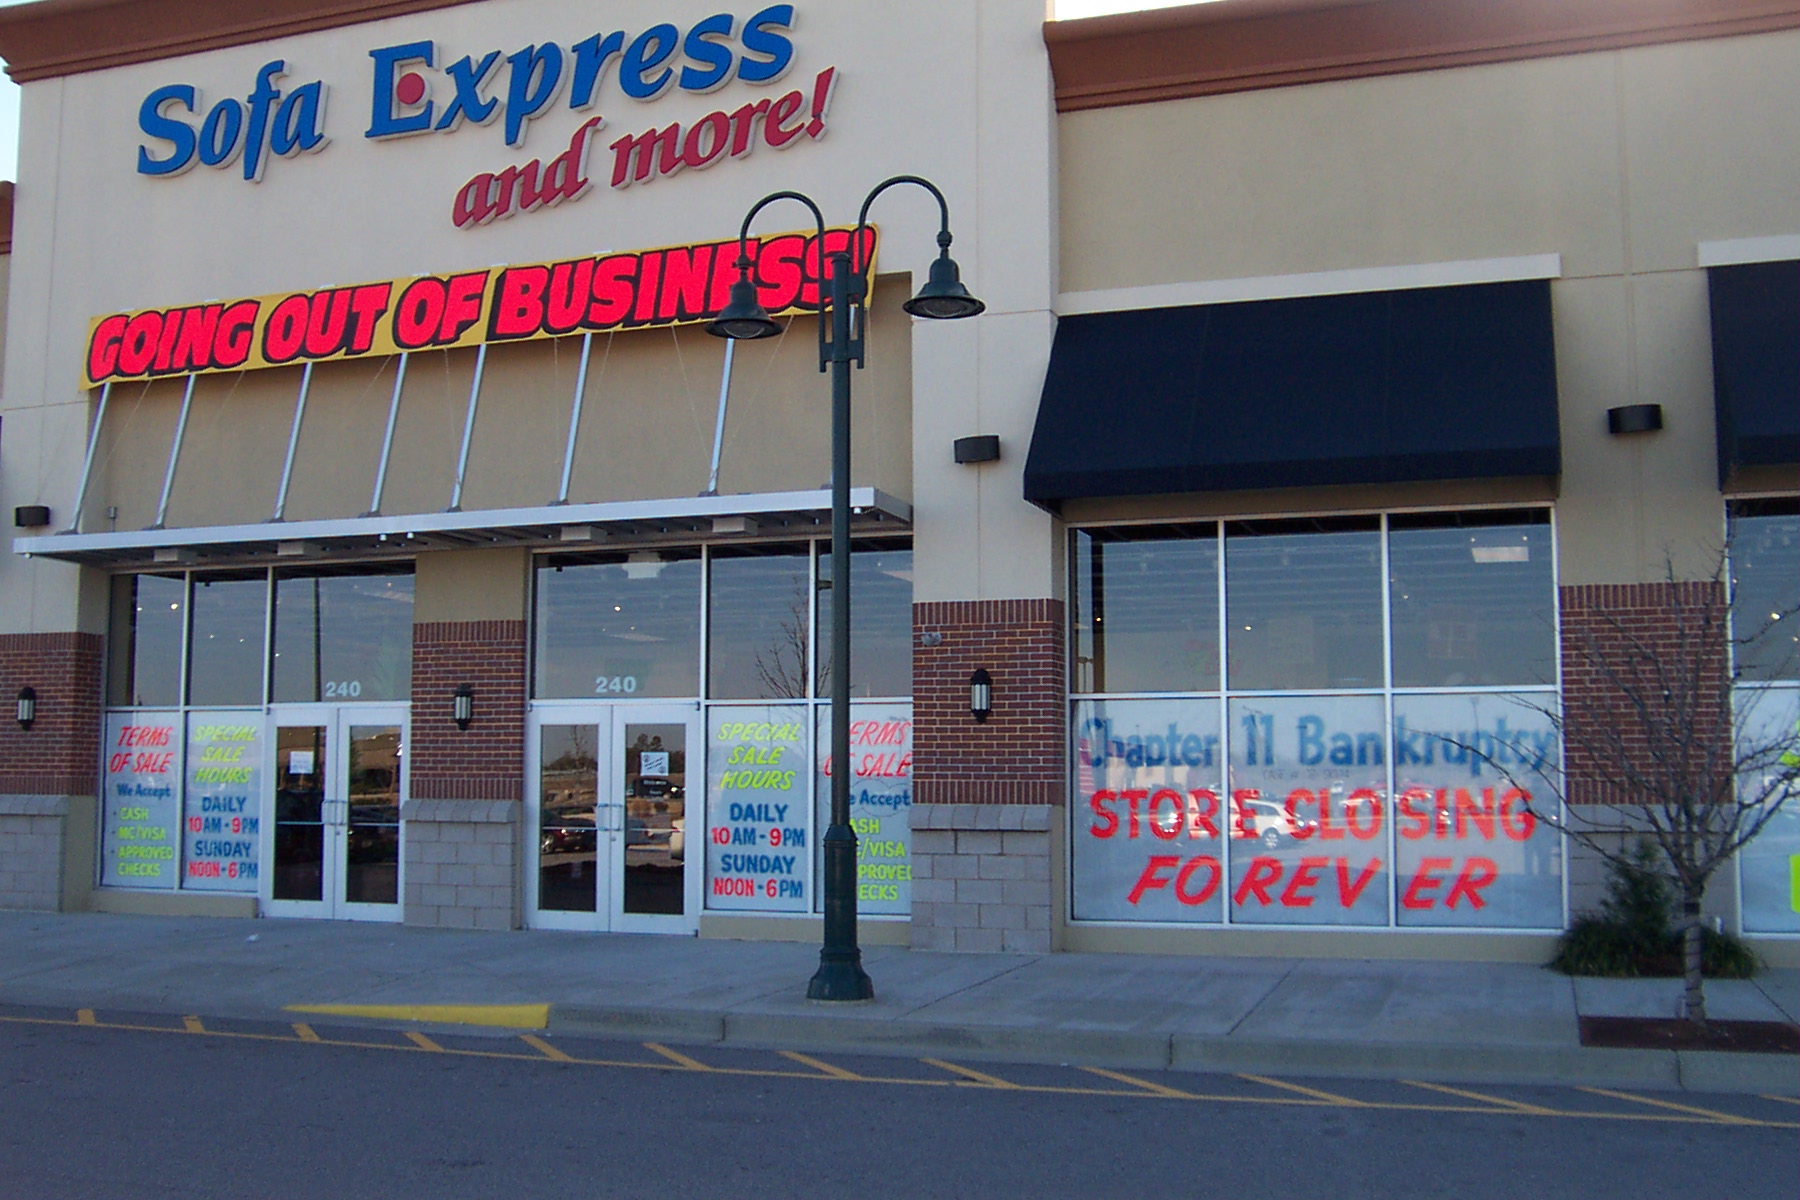 sofa express outlet columbus oh